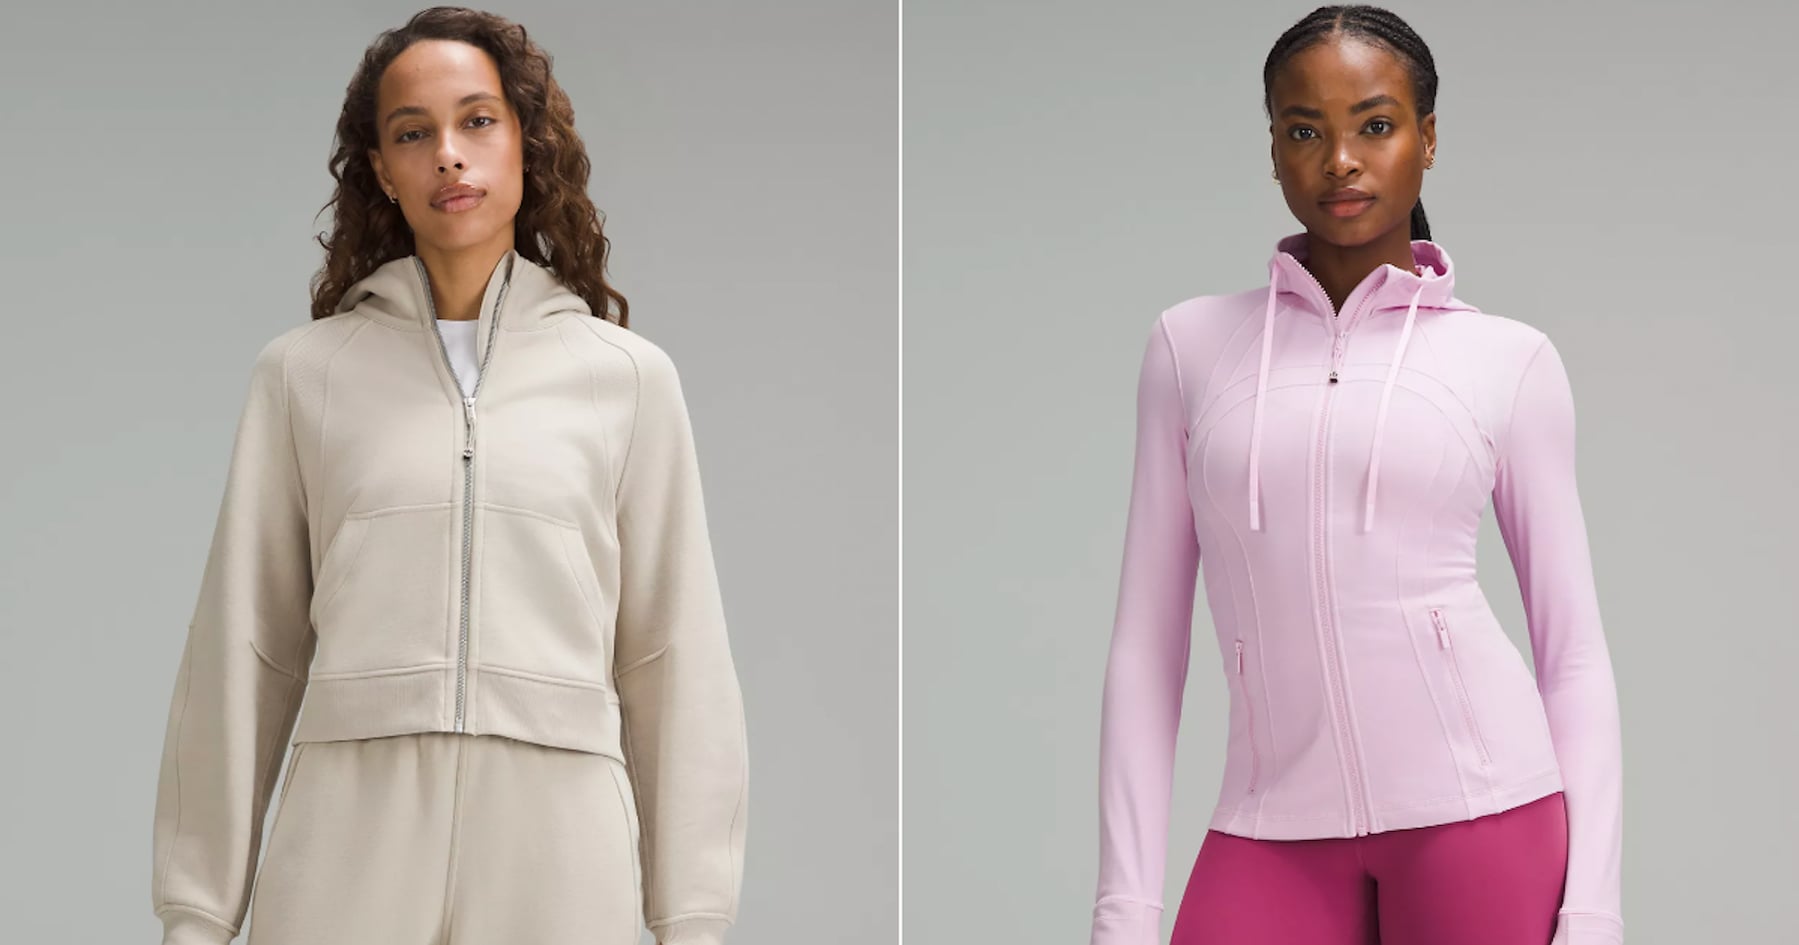 Deck Your Run In Warmth With The Wonderful lululemon Down For It